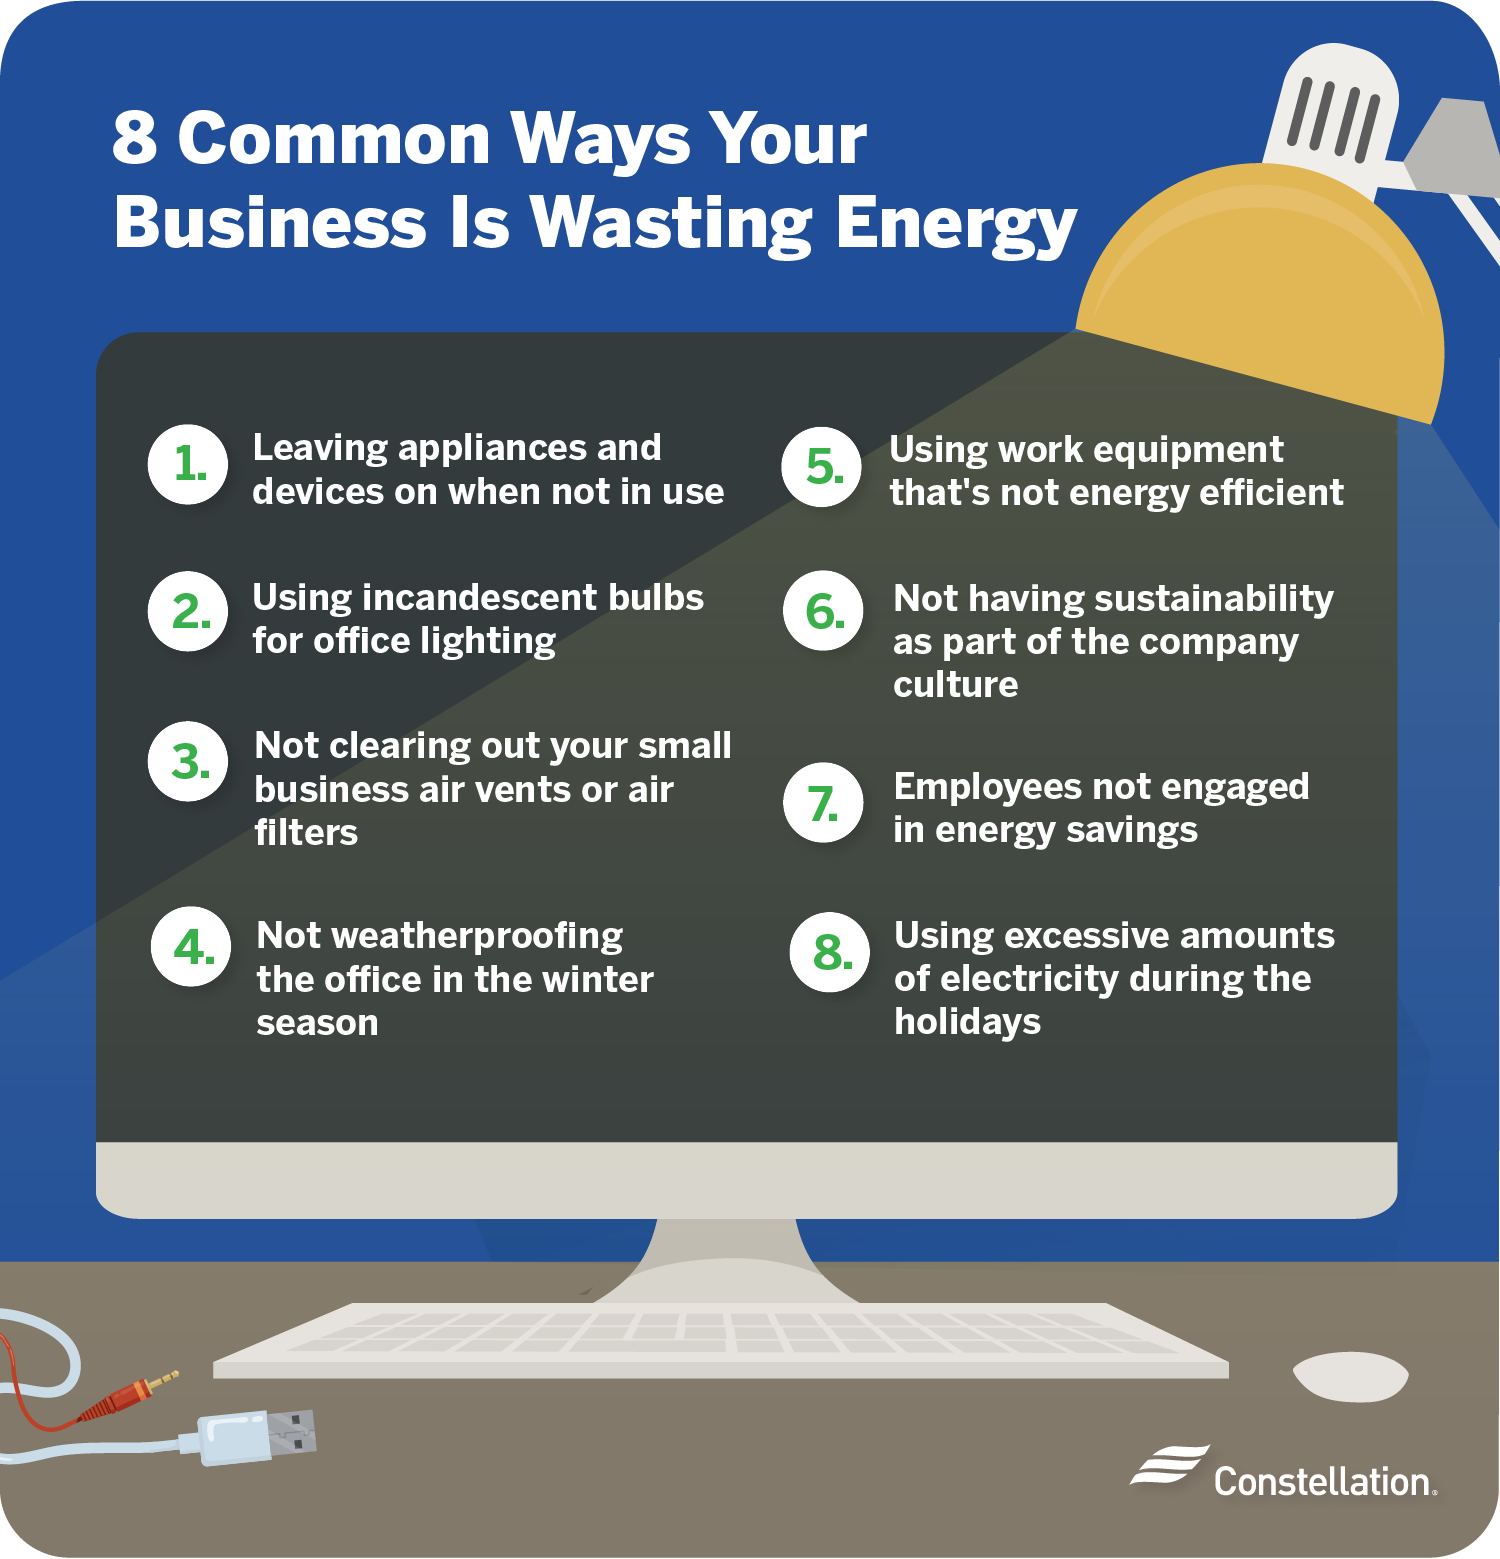 Surprising ways you're wasting electricity at work.